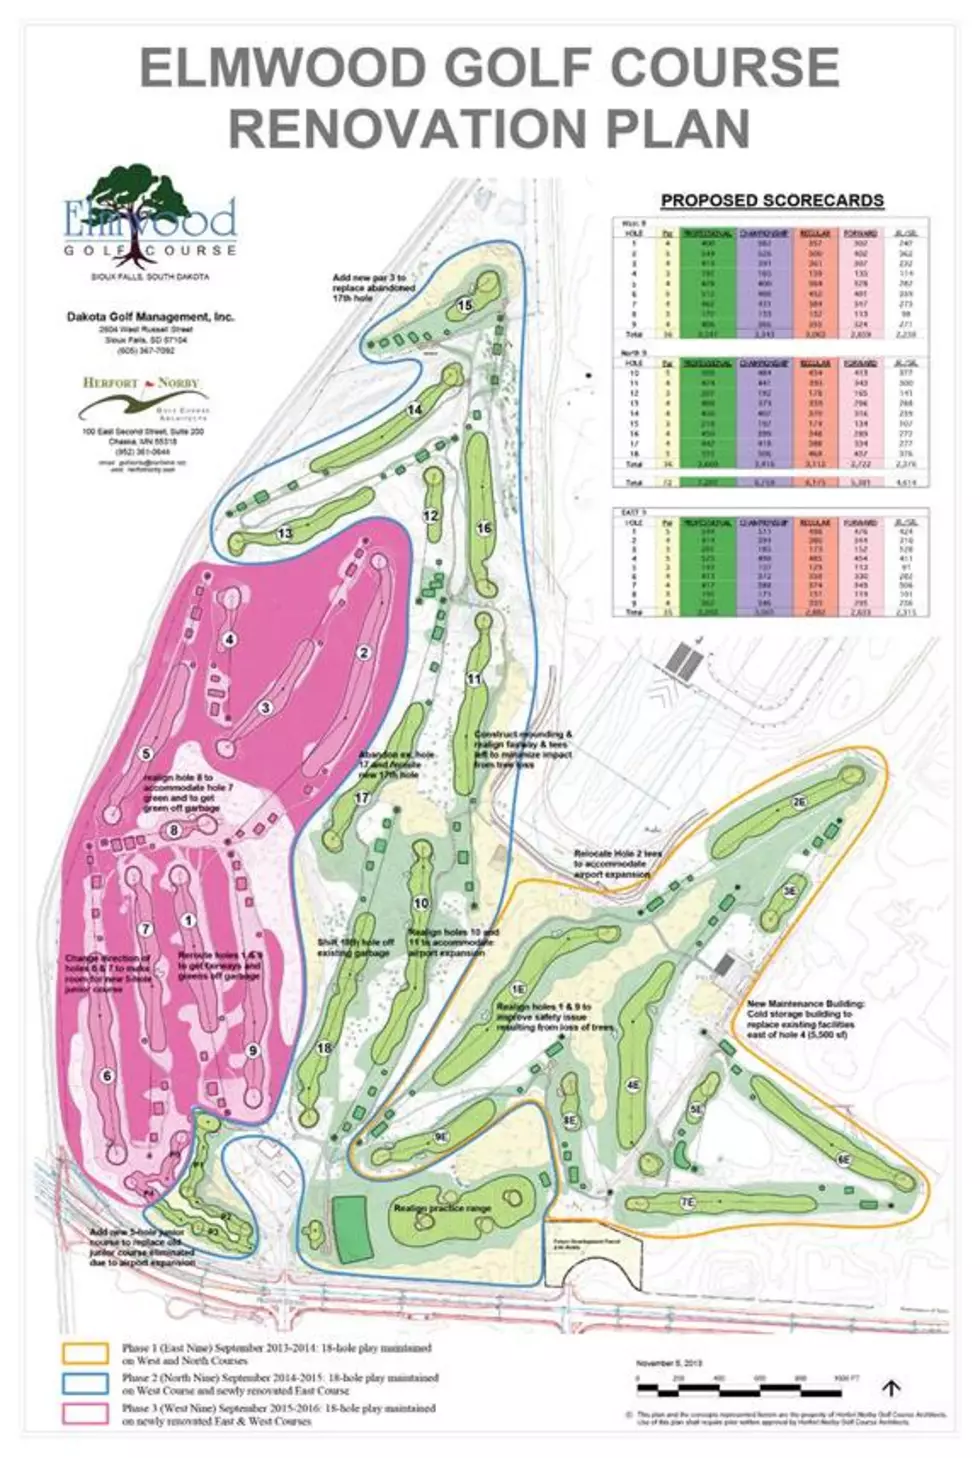 Elmwood Golf Course in Sioux Falls Gets Extreme Makeover